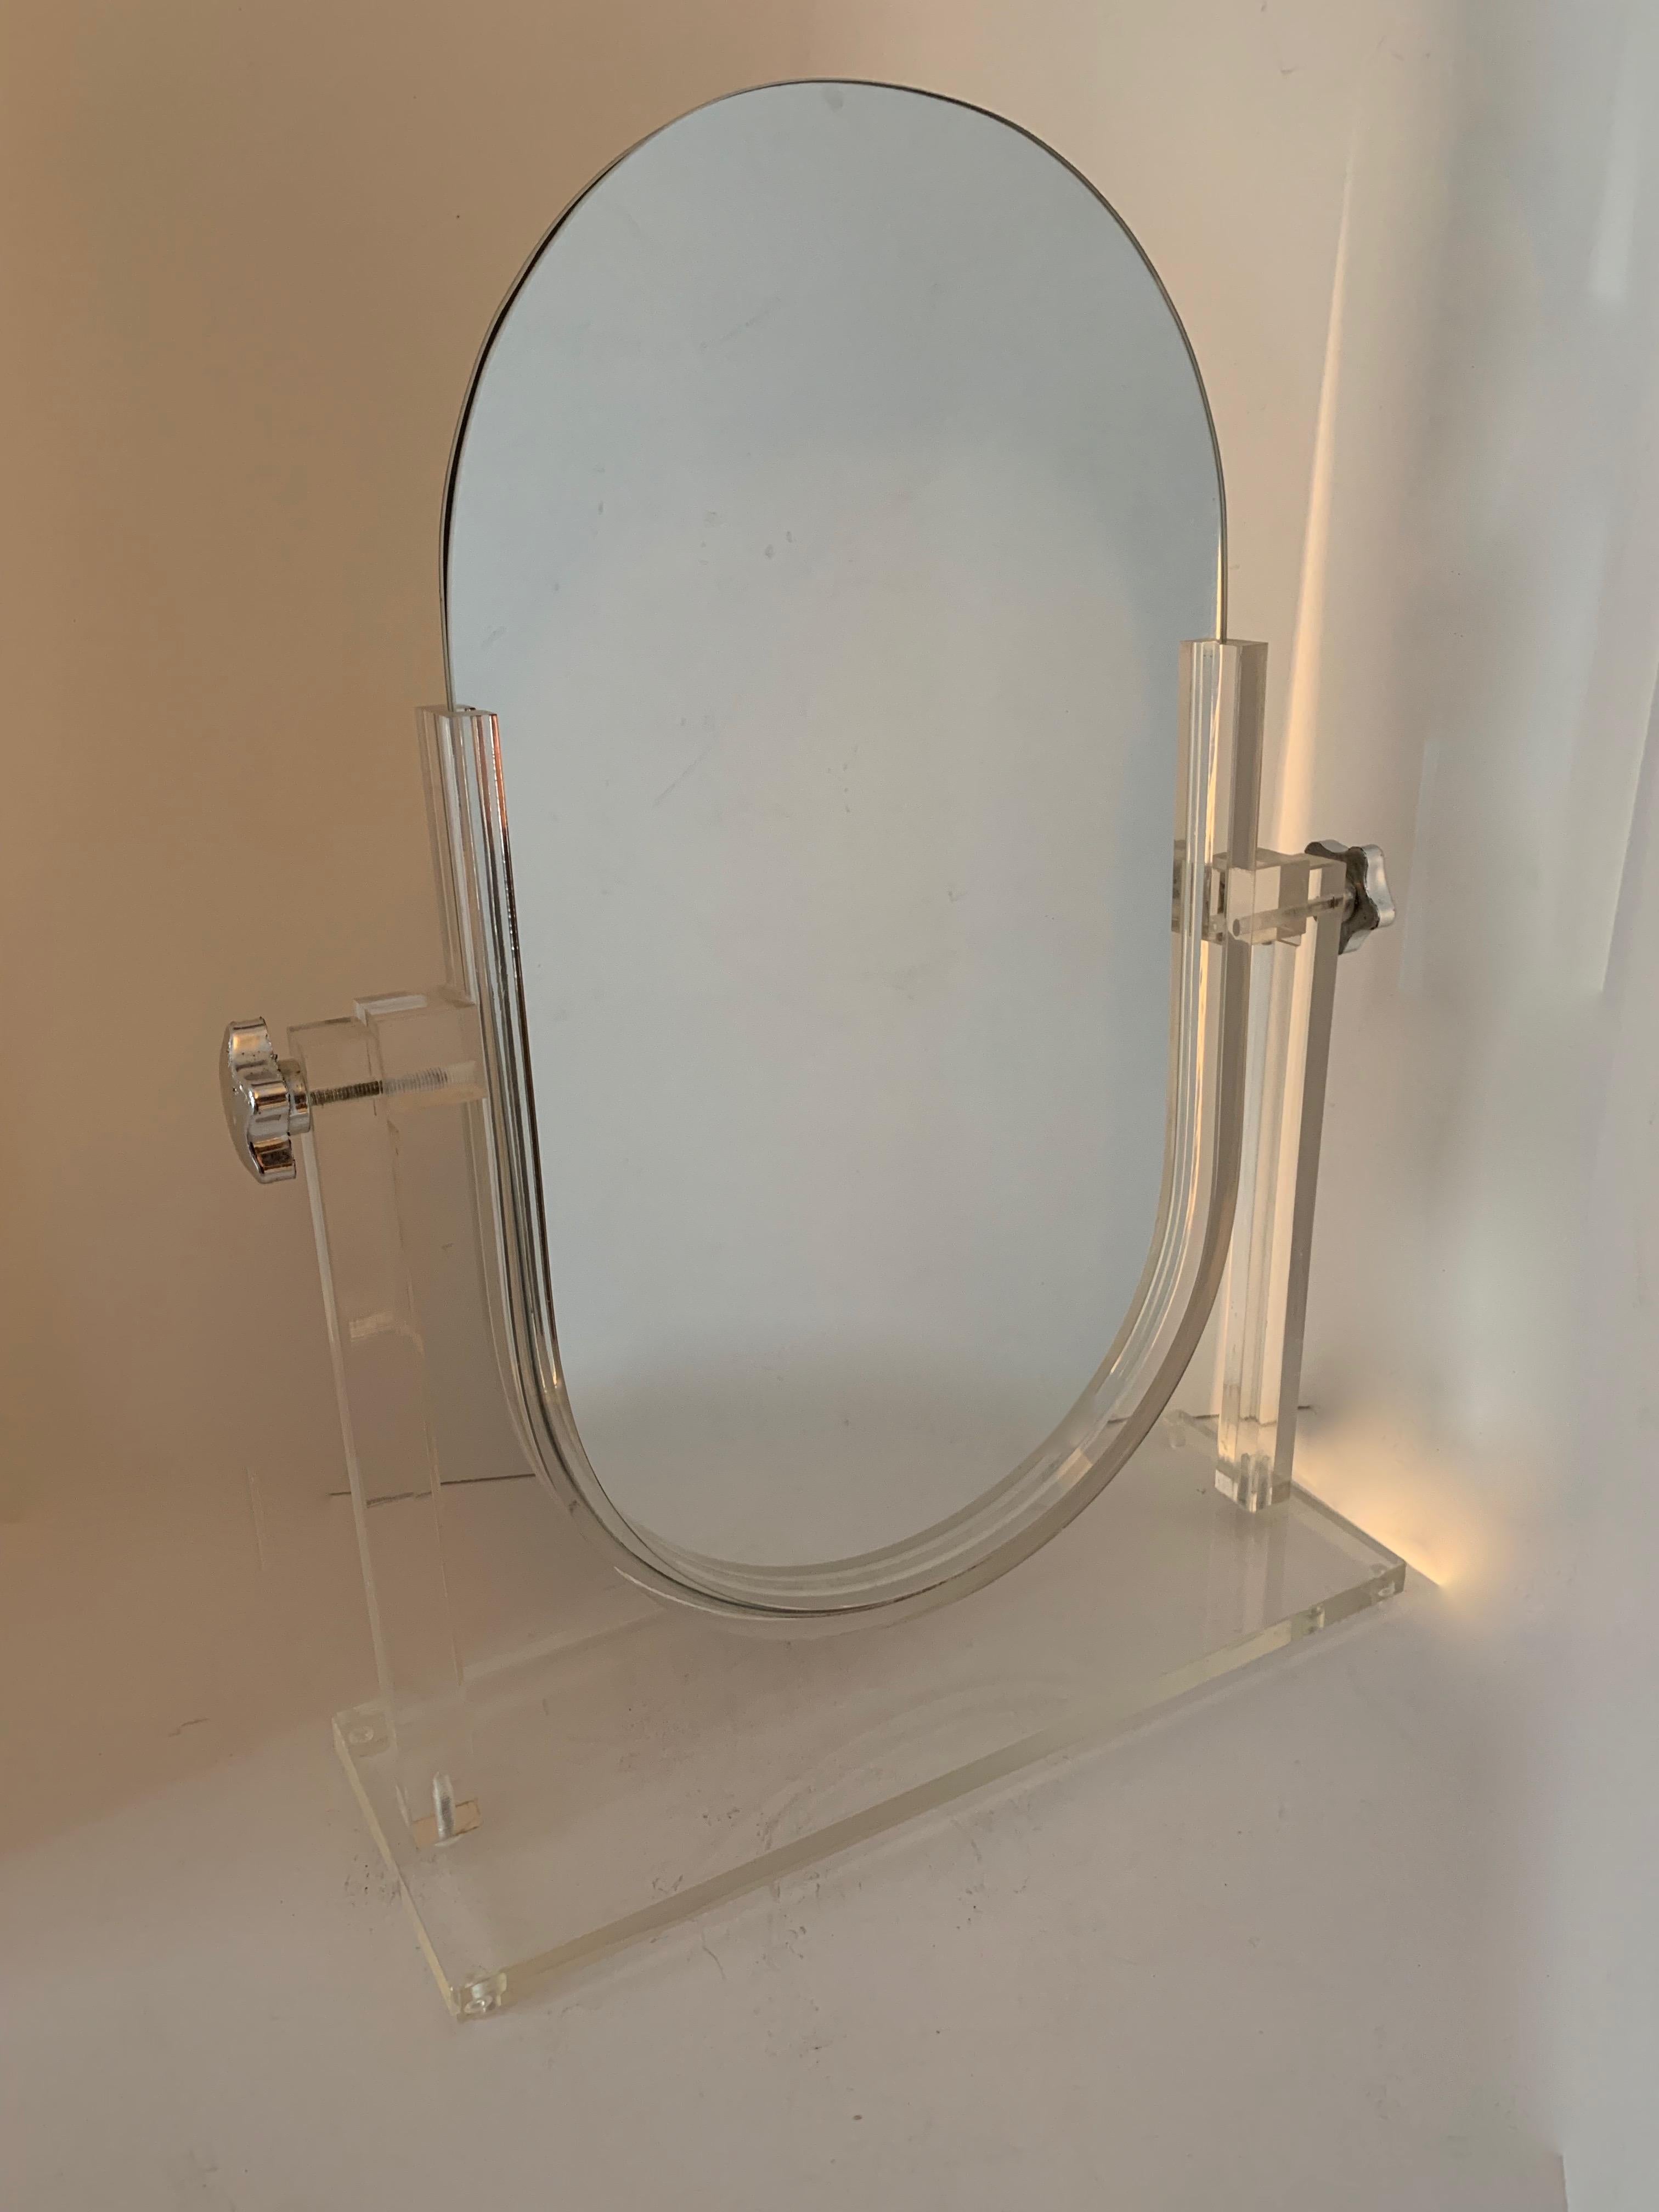 Acrylic stand holding a two mirrors - for the vanity or dressing table... both mirrors are normal and do not magnify. Can be adjusted to tilt in many directions. The mirrors are easily removed for cleaning or replacement, just slide out (see photo).